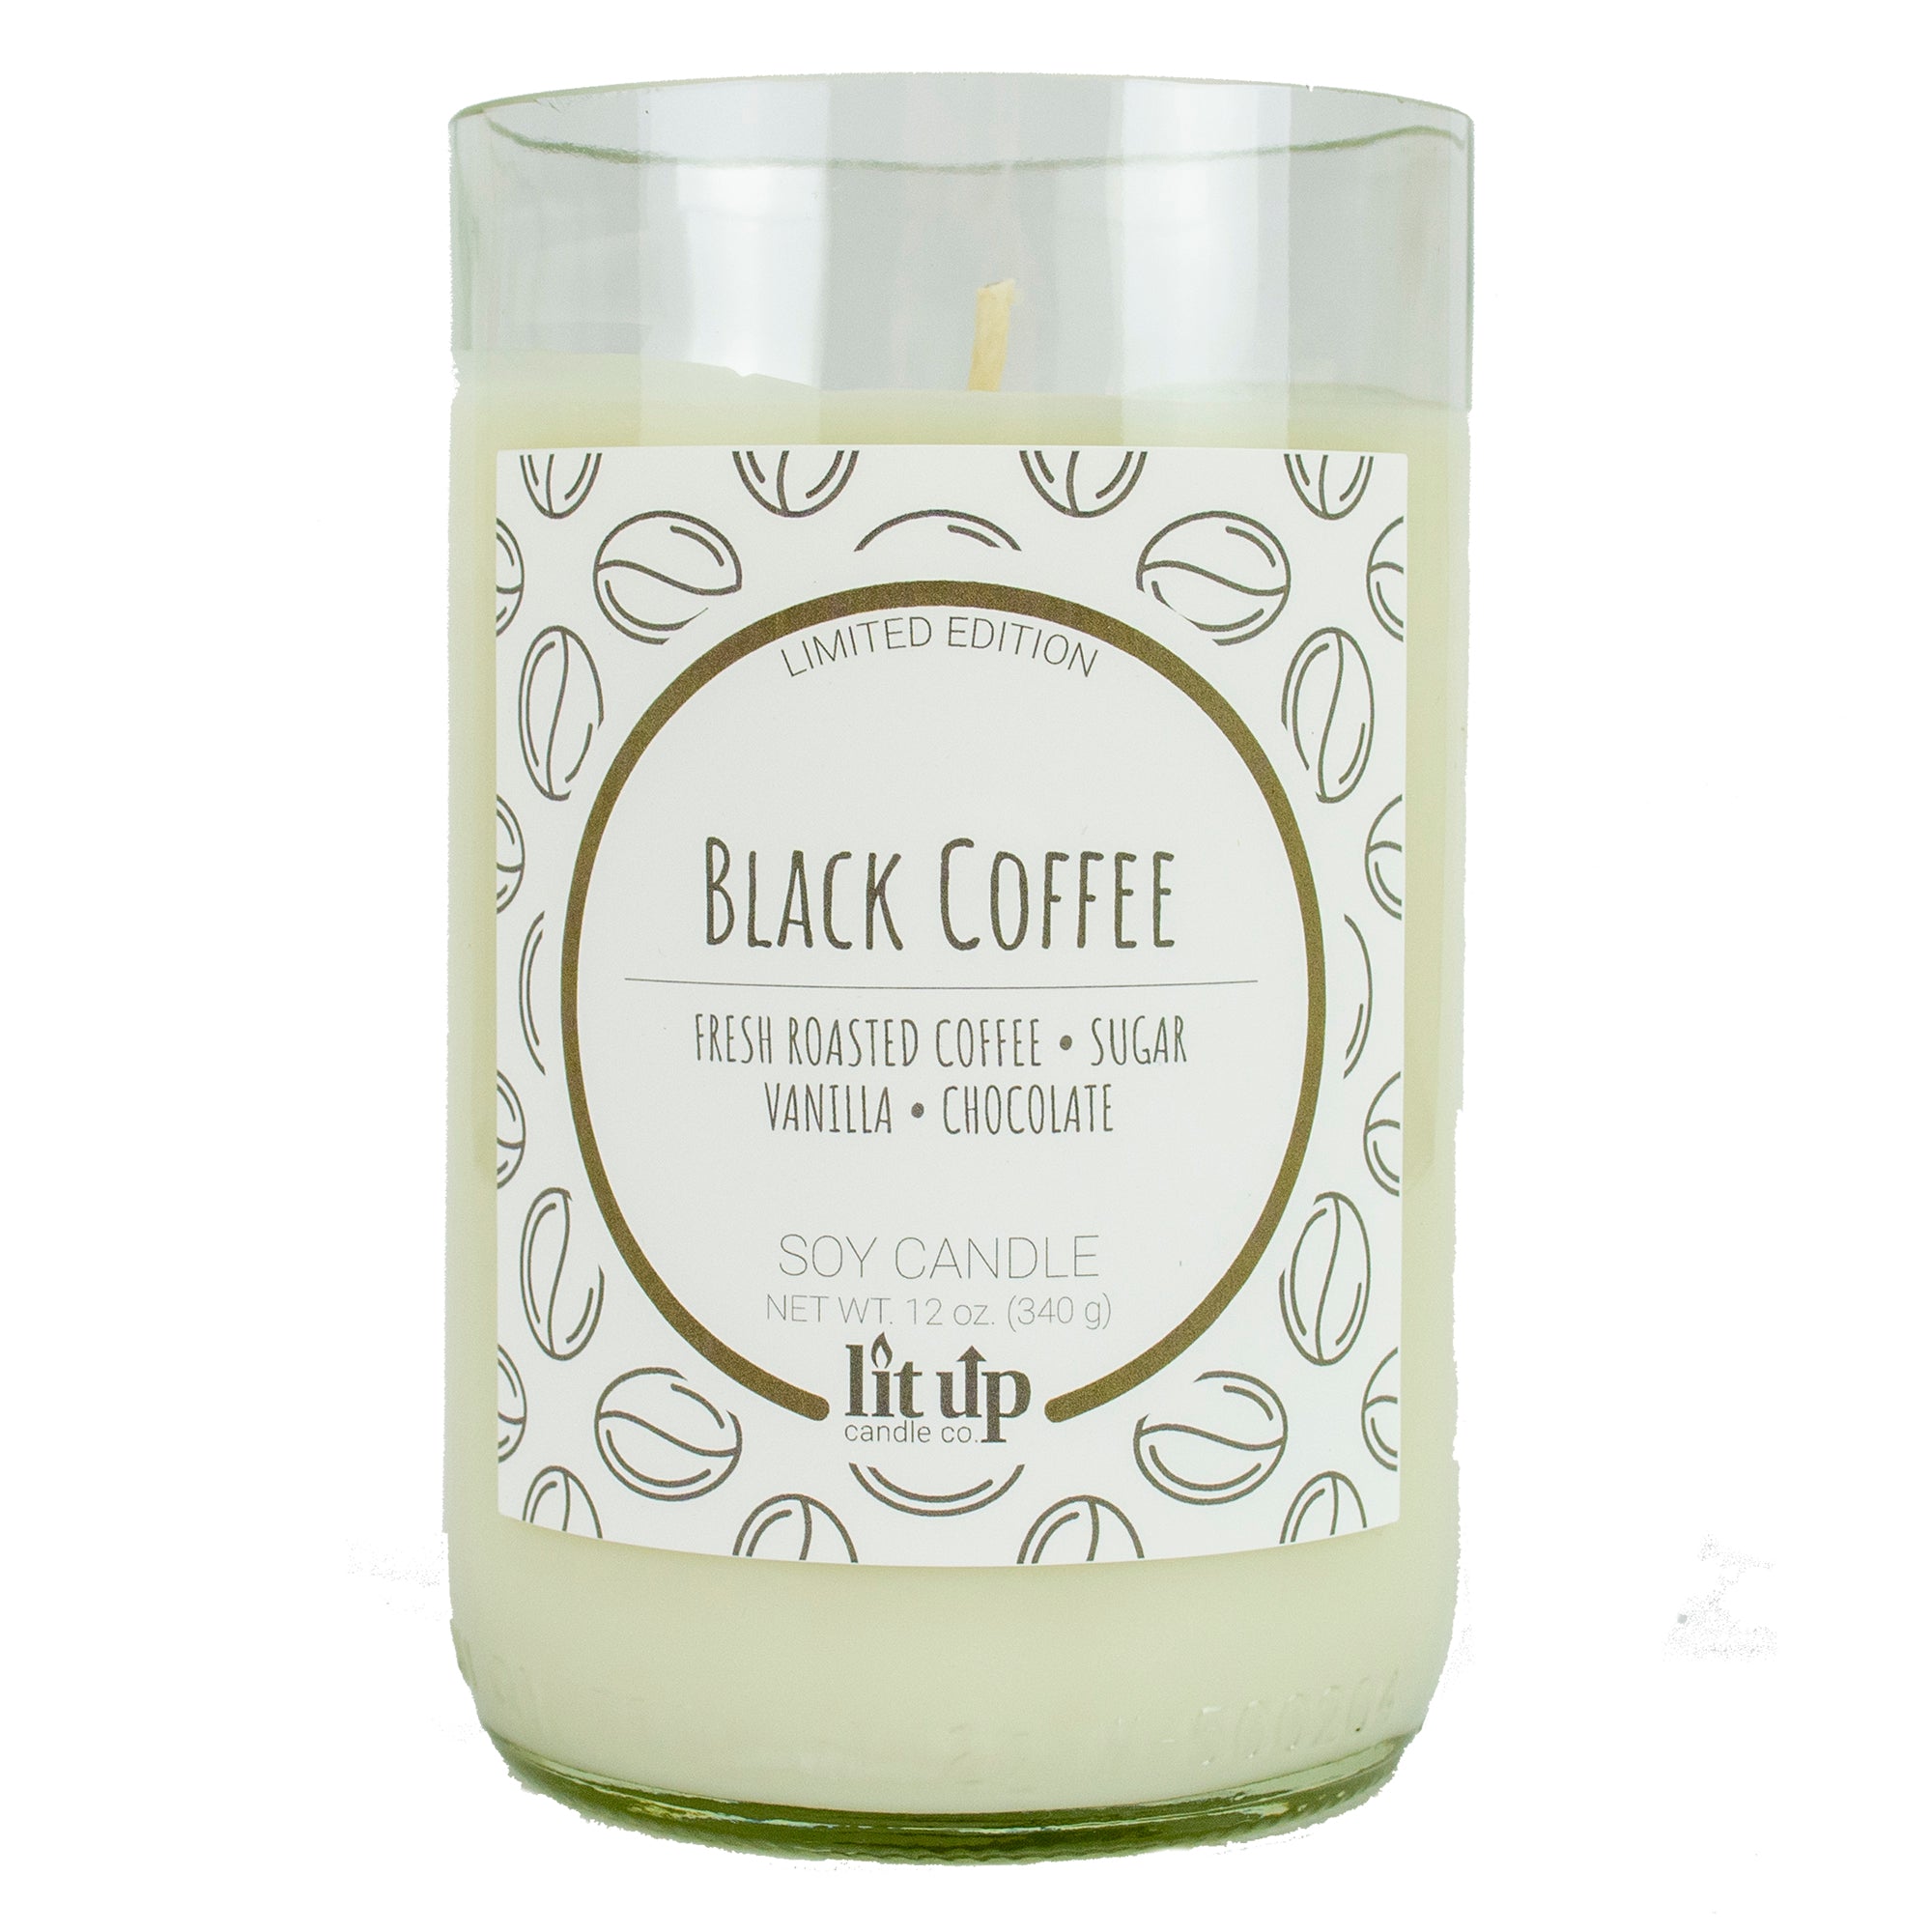 Black Coffee scented 12 oz. soy candle in upcycled wine bottle - Limited Edition